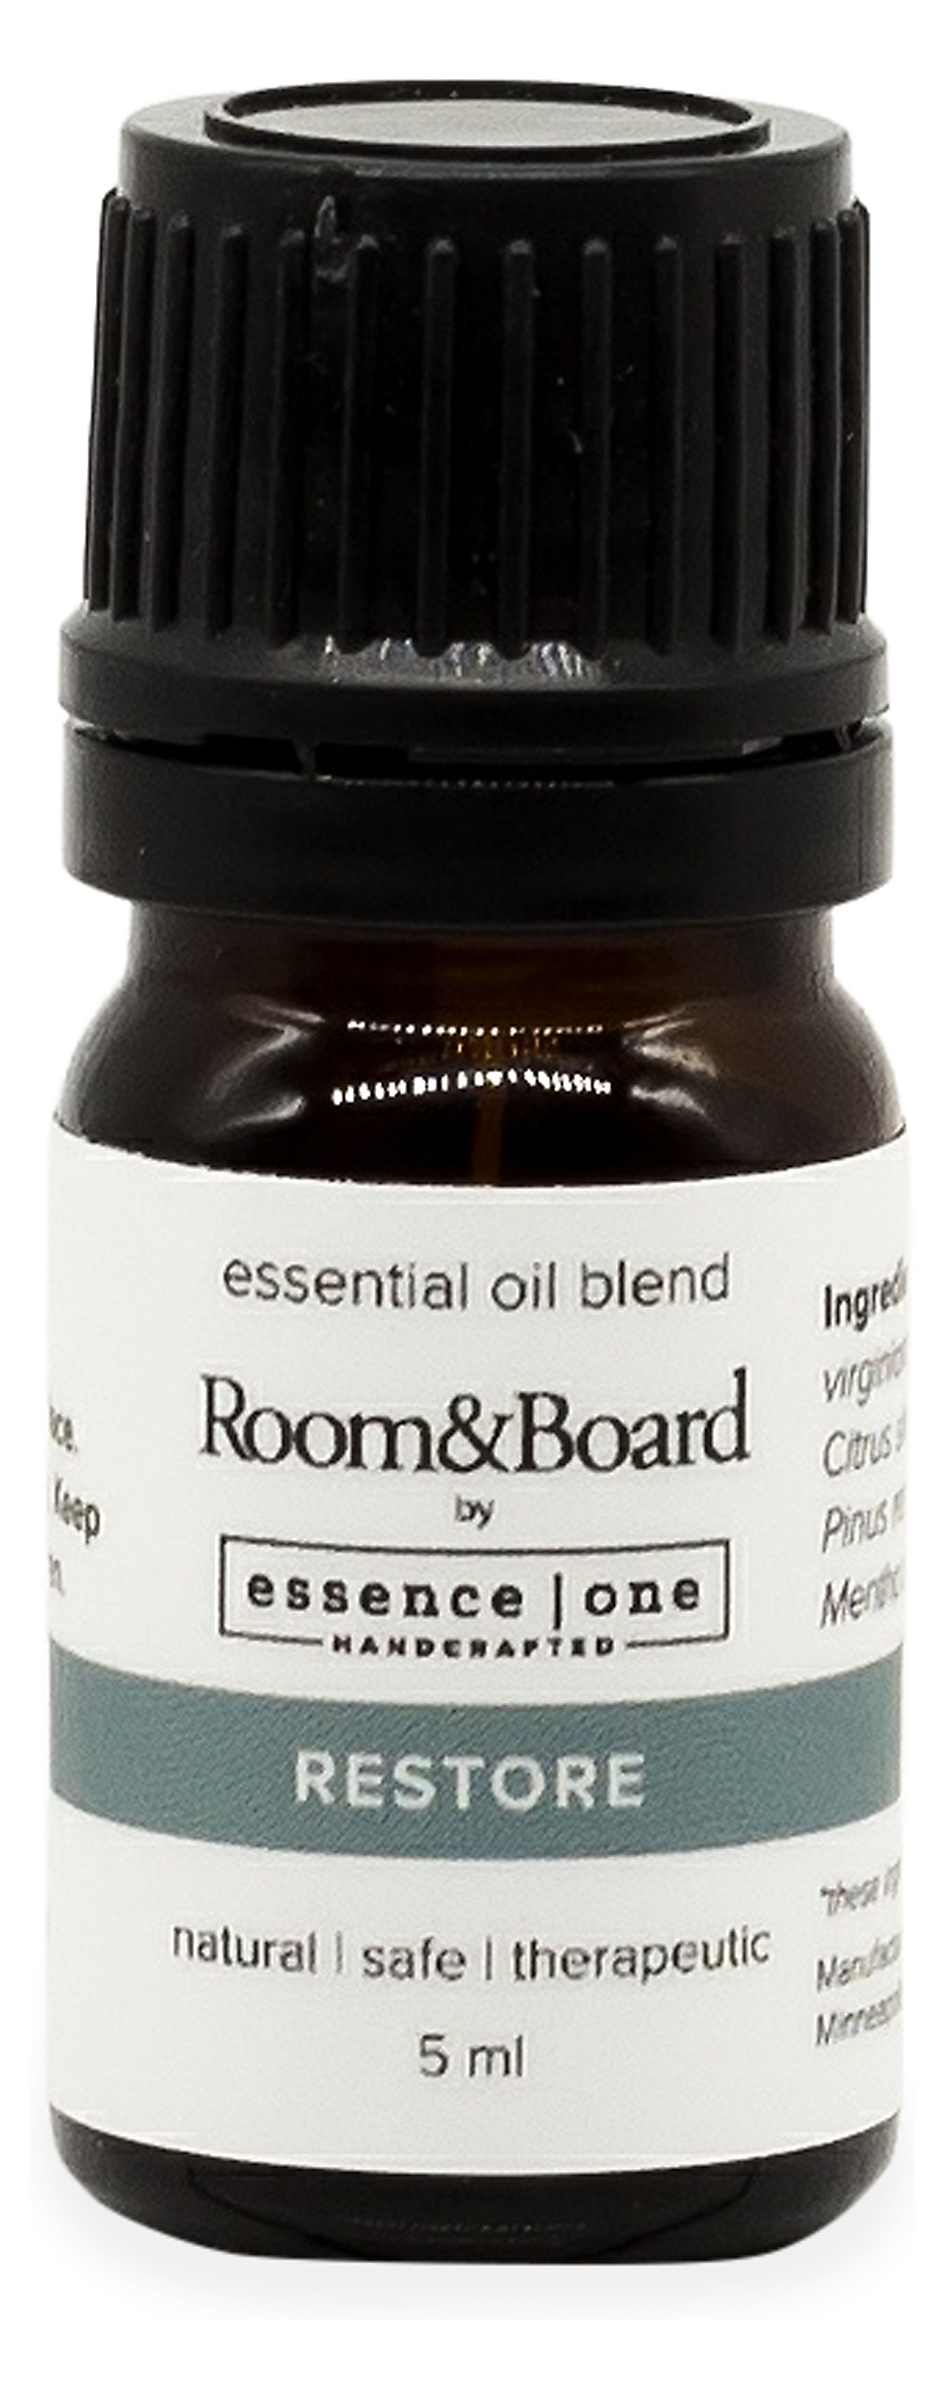 Room & Board and Essence One - 5ml Essential Oil in Restore